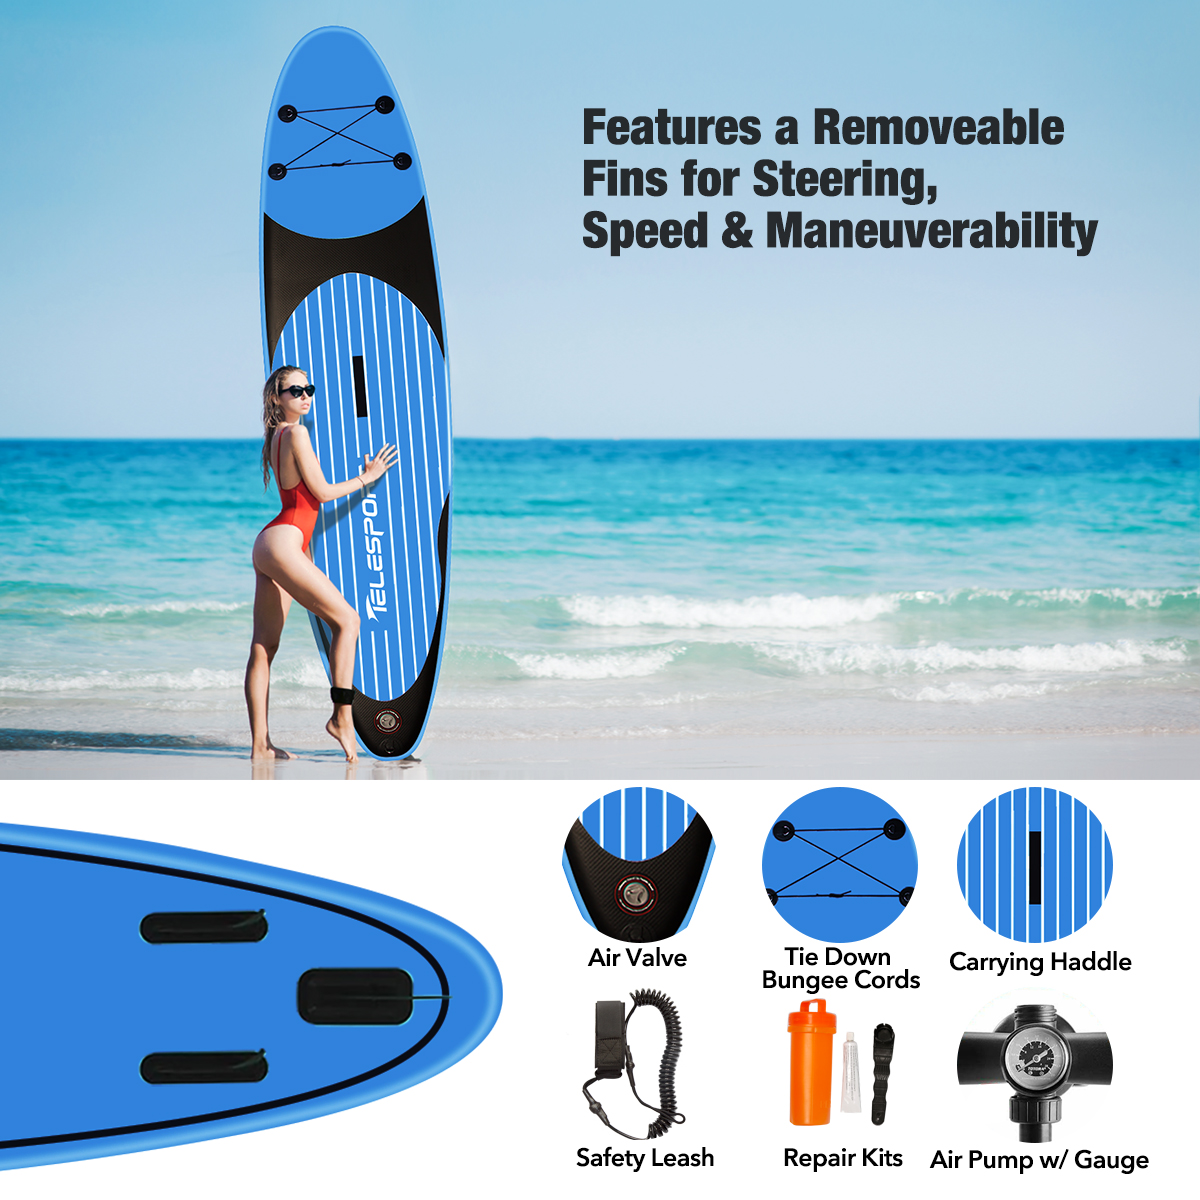 Telesport Inflatable Stand Up Paddle Board 10.6ft with SUP Carry Bag, Adjustable Paddles Non-Slip Deck, Leash and Fin for Padding Surfing - image 6 of 7